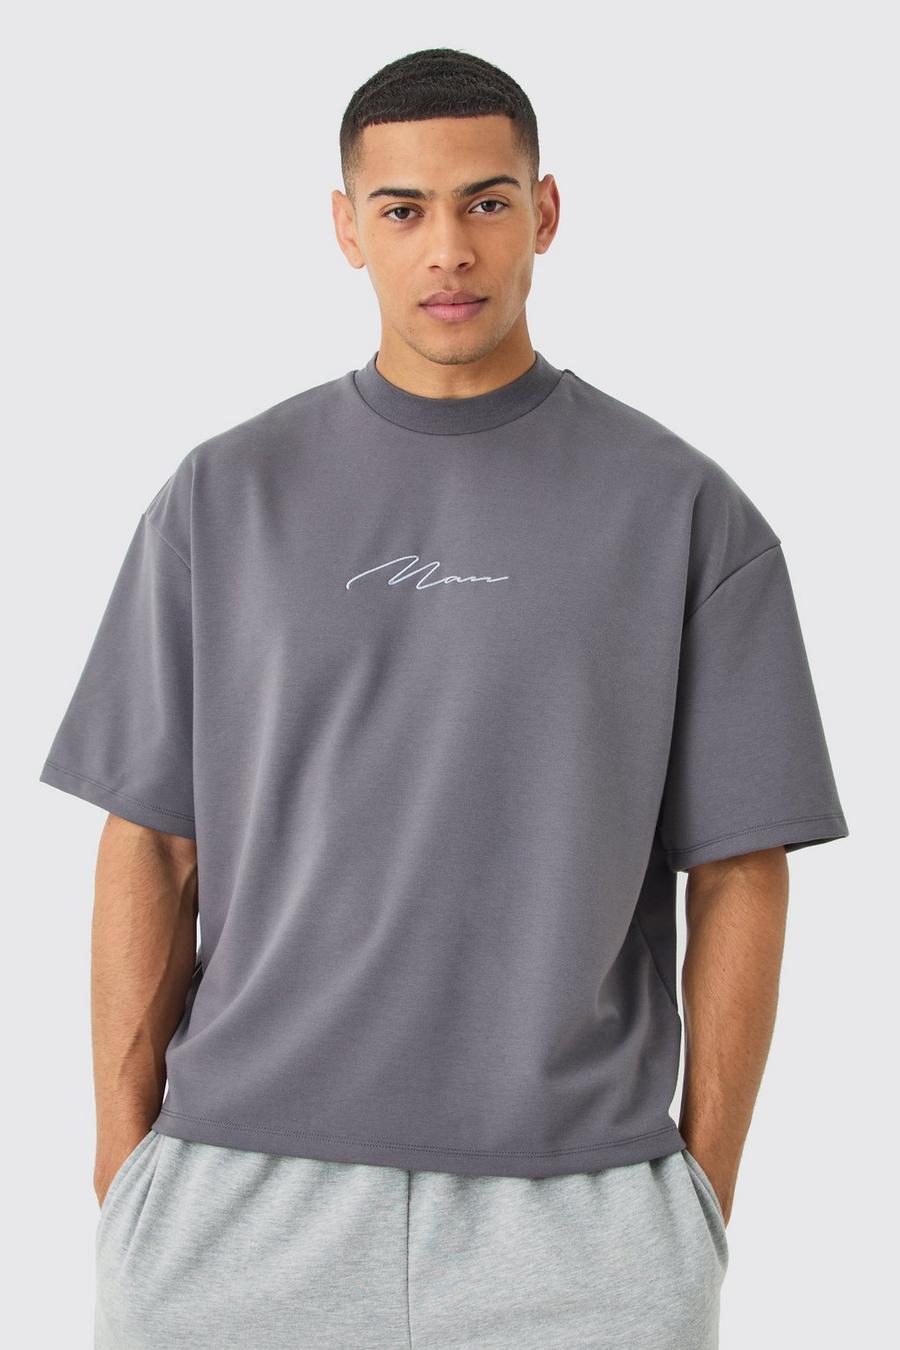 Charcoal grey Oversized Boxy Premium Super Heavyweight Embroidered T-shirt